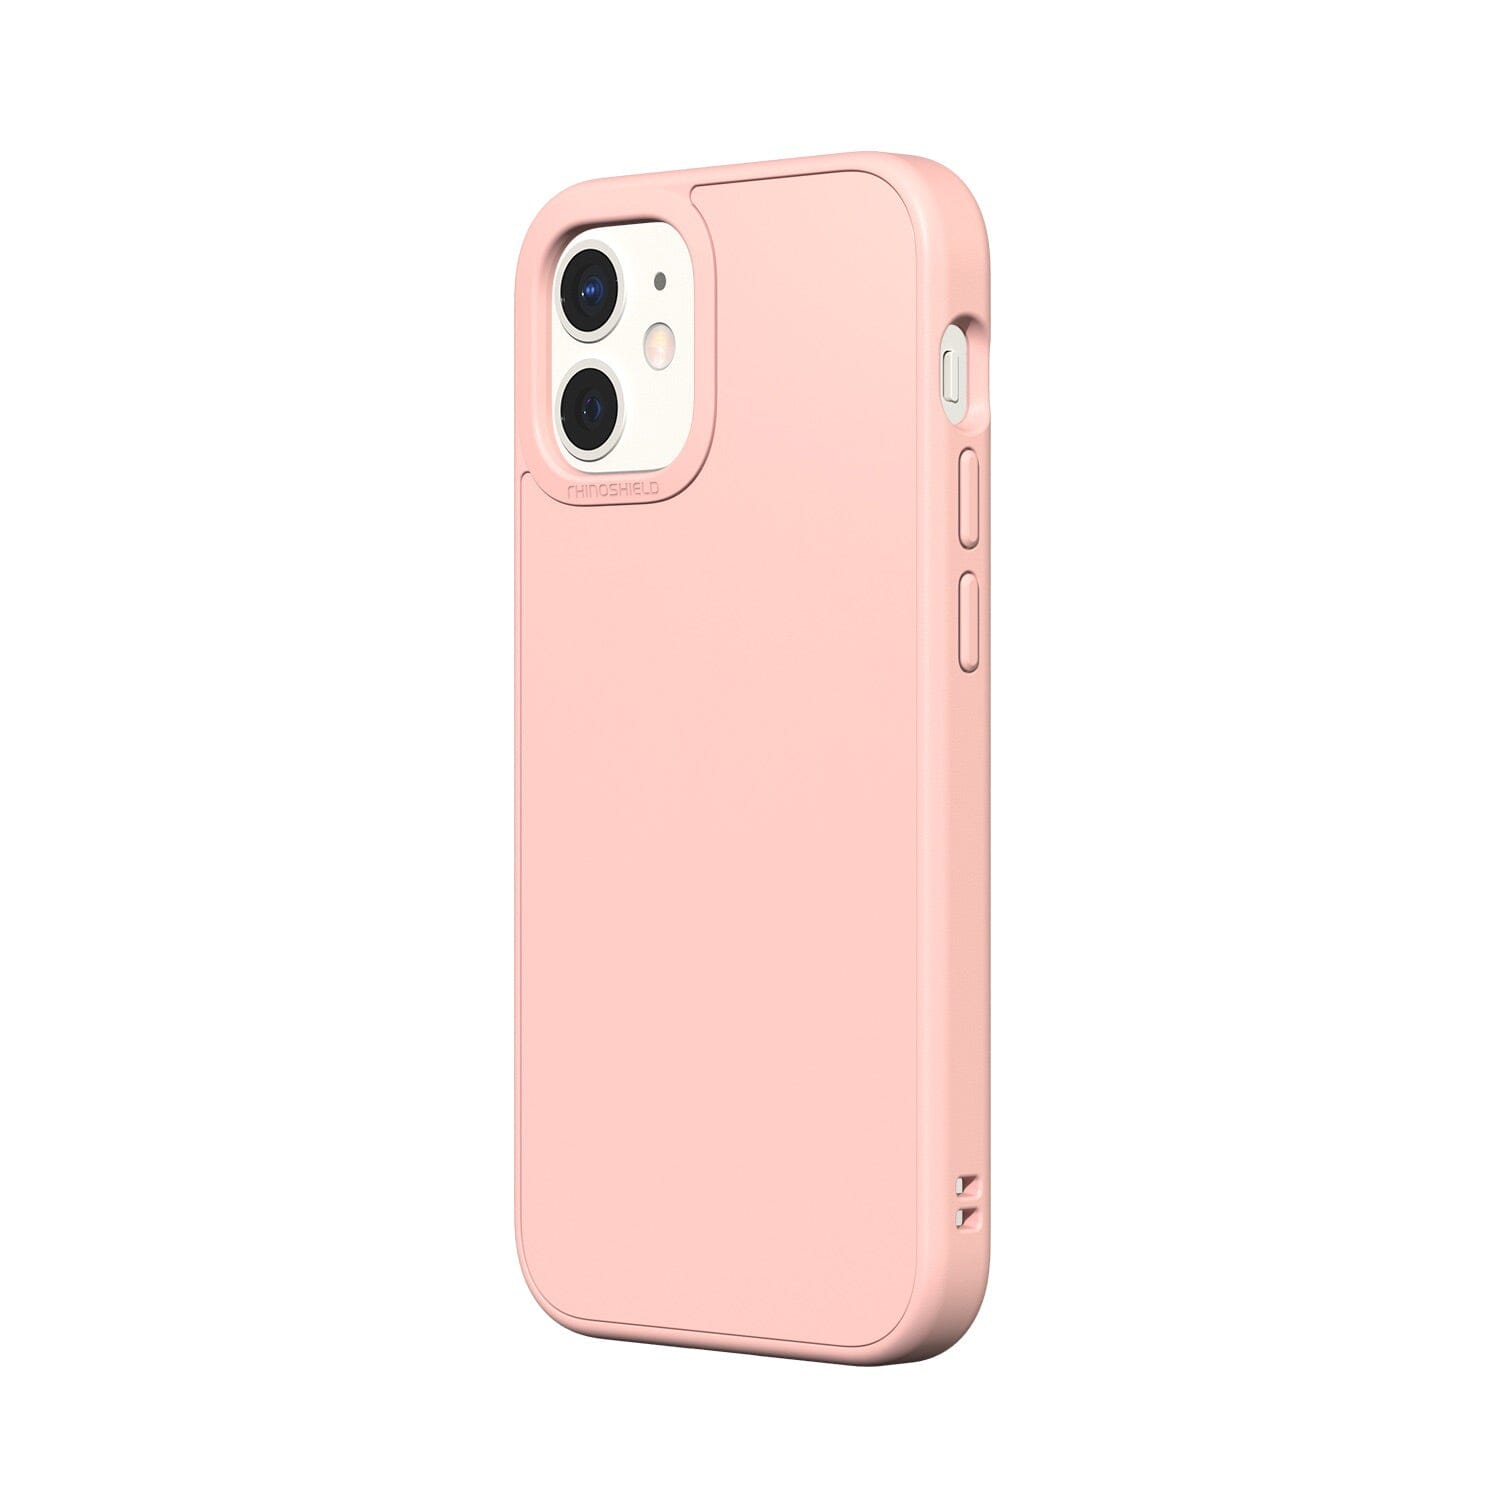 RhinoShield SolidSuit Protective Case with Premium Finish for iPhone 12 Series (2020) iPhone 12 Series RhinoShield iPhone 12 mini 5.4" Classic Blush Pink 